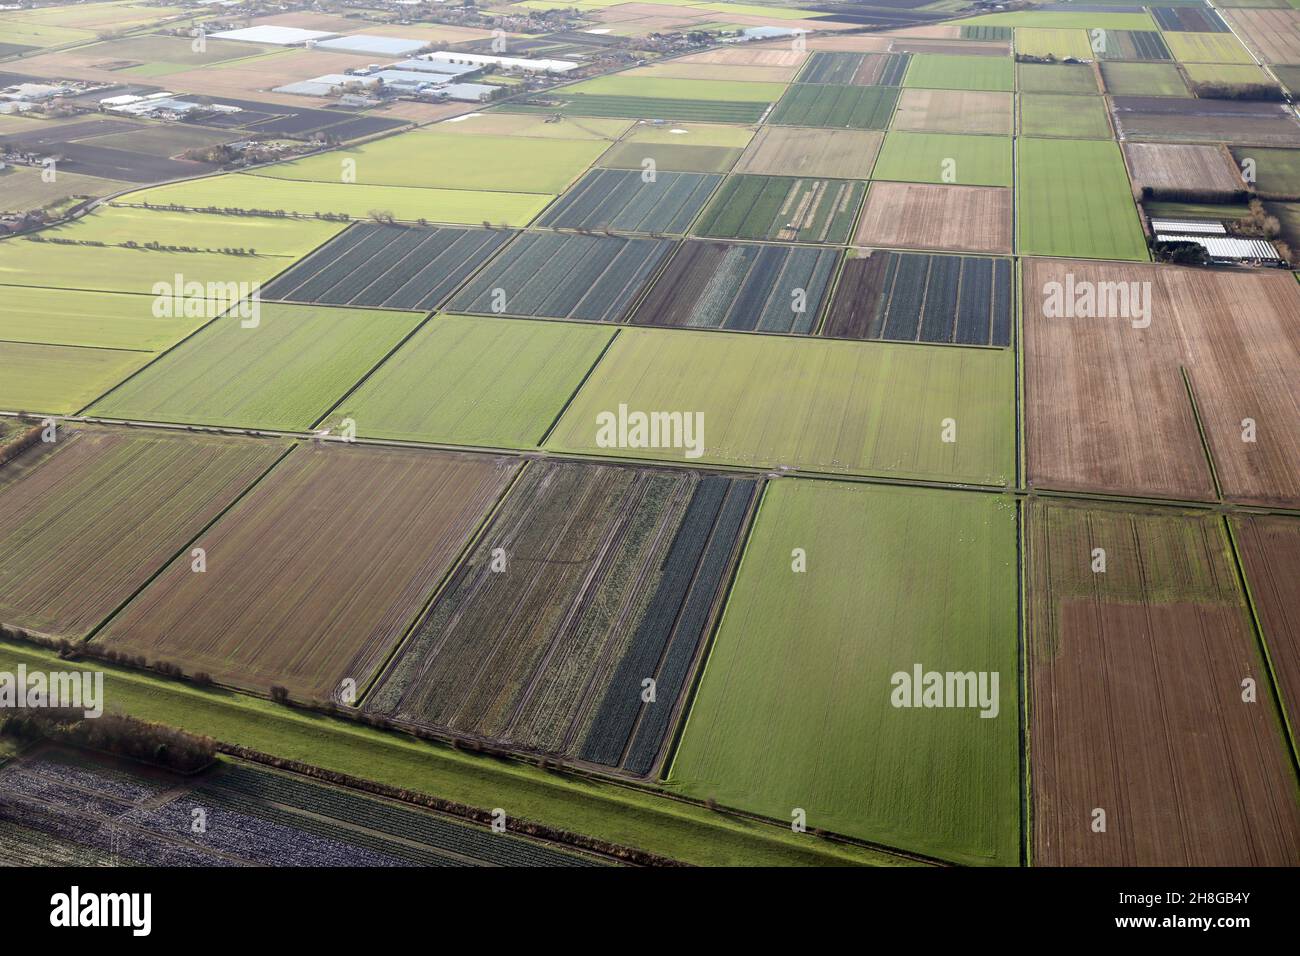 aerial view of horticultural fields in the Hesketh Bank area of Lancashire, west of Preston and NE of Blackpool, Lancashire Stock Photo